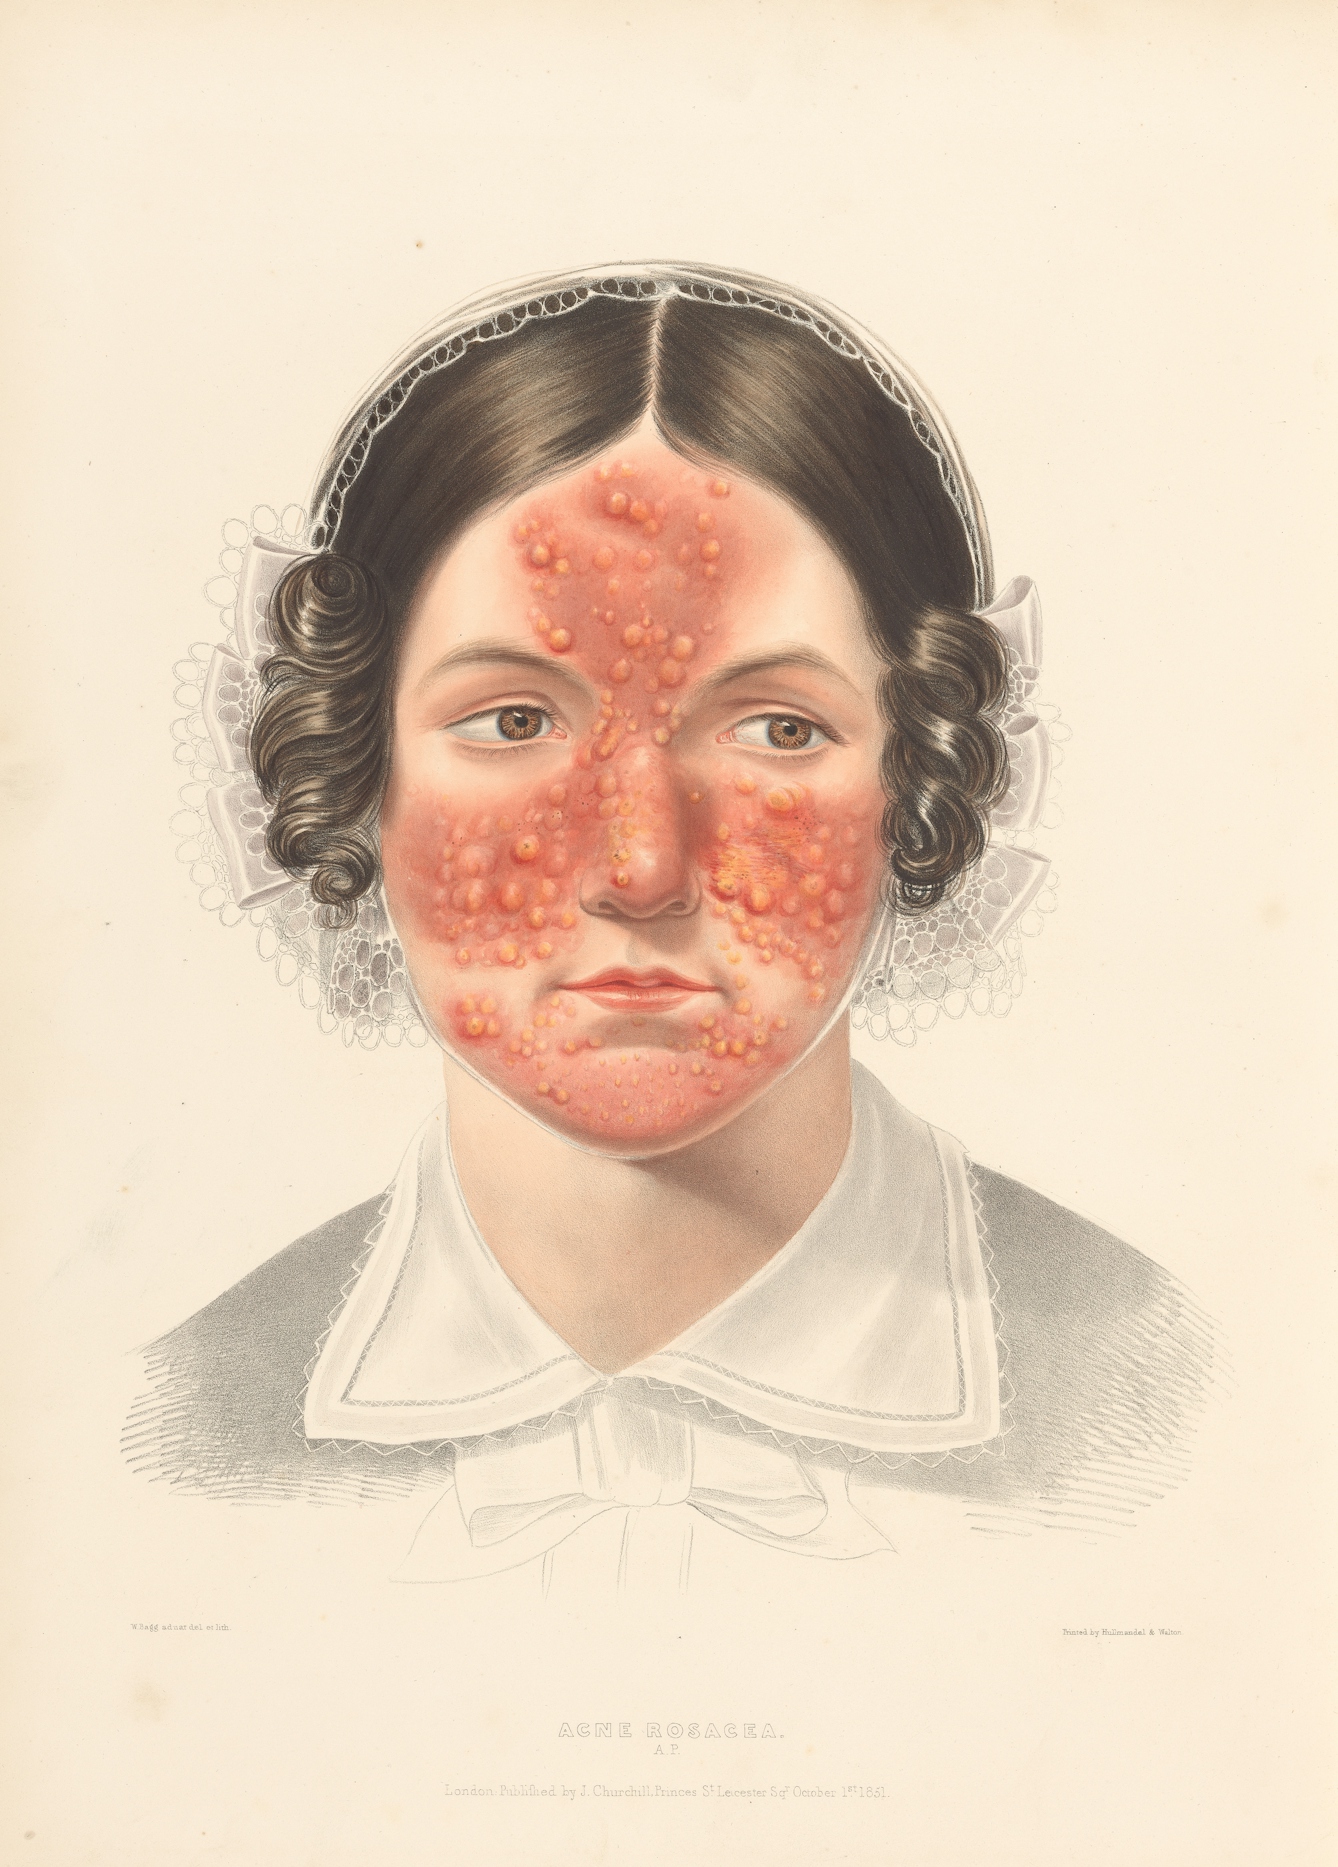 Photograph of an illustration showing the head and shoulders of a woman in a bonnet with red acne marks on her face.